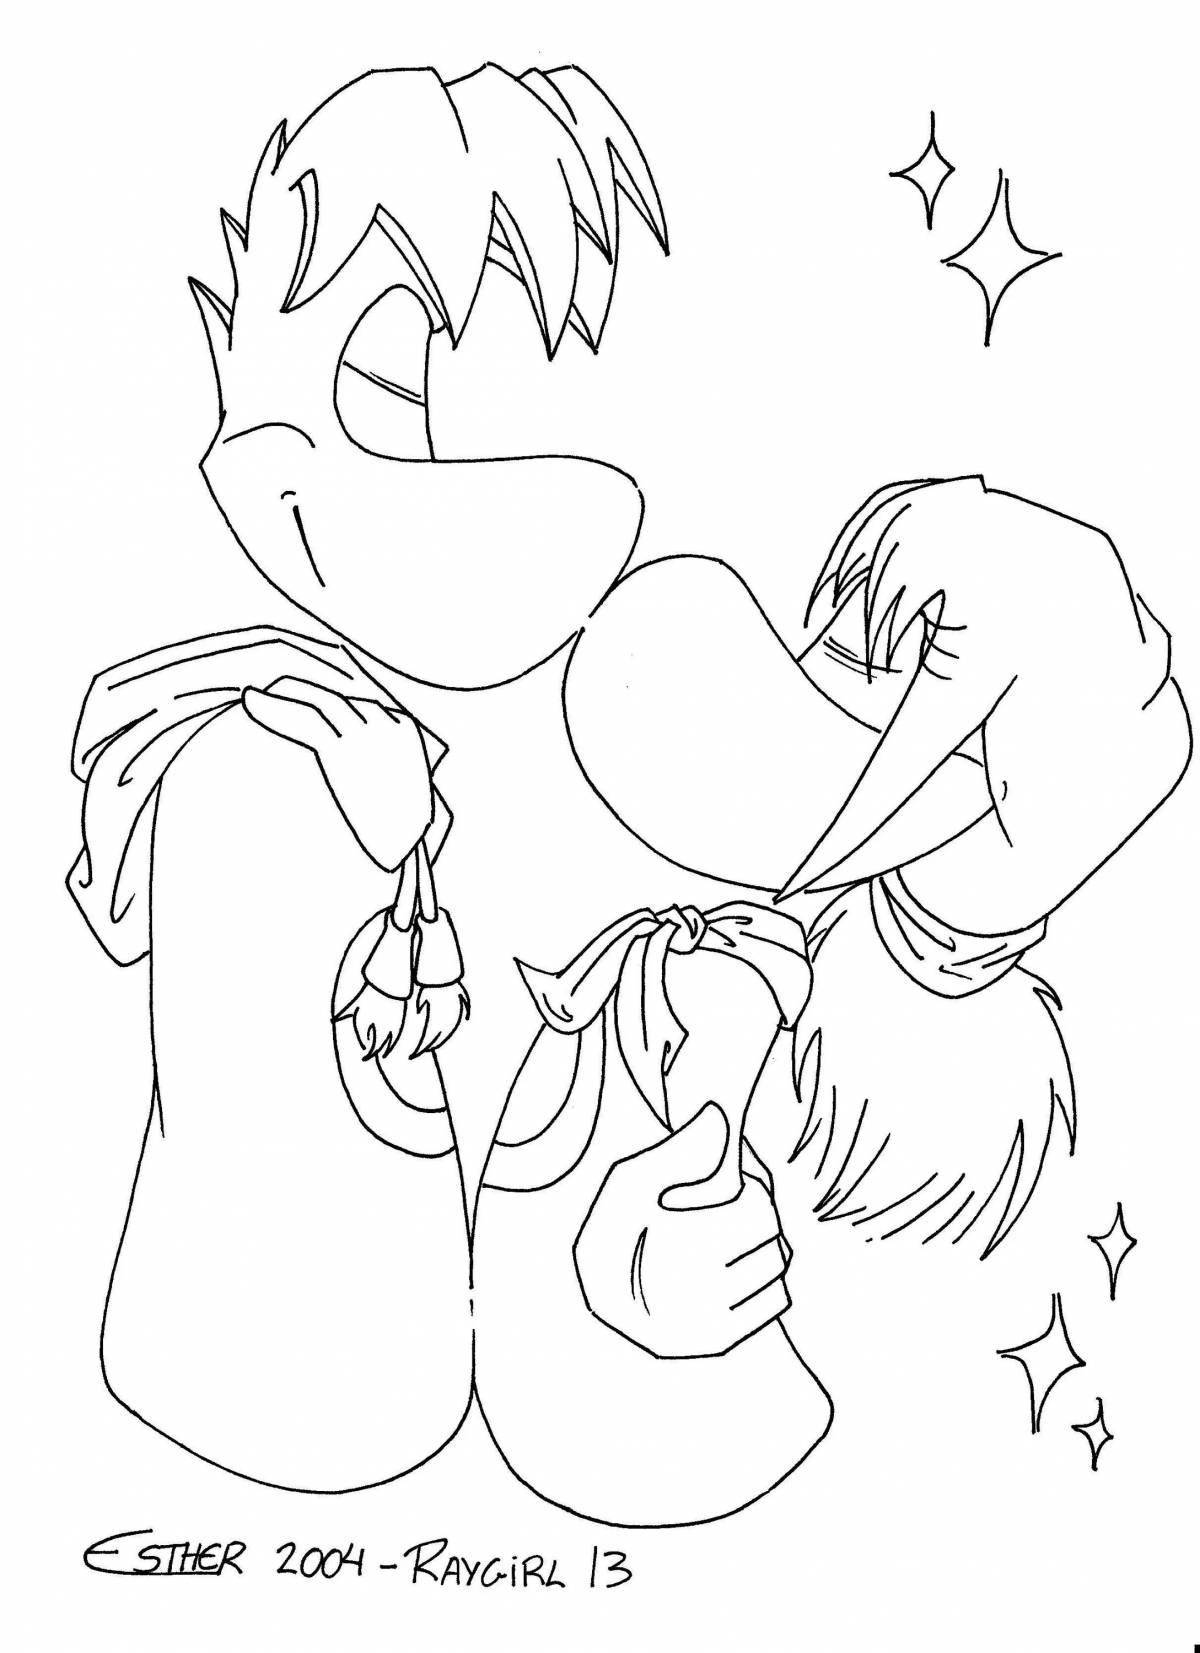 Colorful rayman coloring page